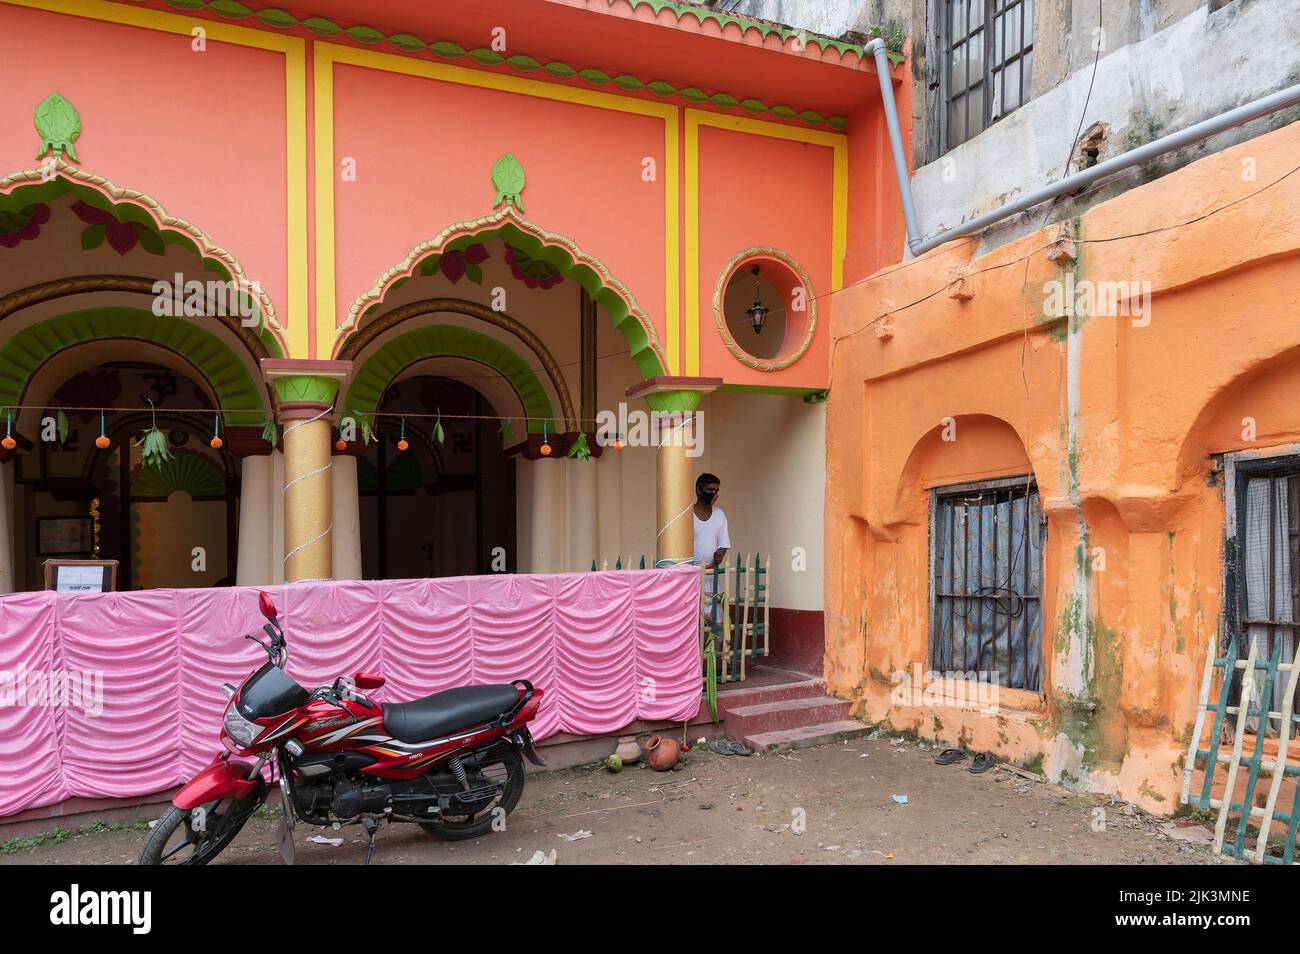 Howrah, India -October 26th, 2020 : Goddess Durga being worshipped inside old age decorated home. Durga Puja pandal, biggest festival of Hinduism. Stock Photo